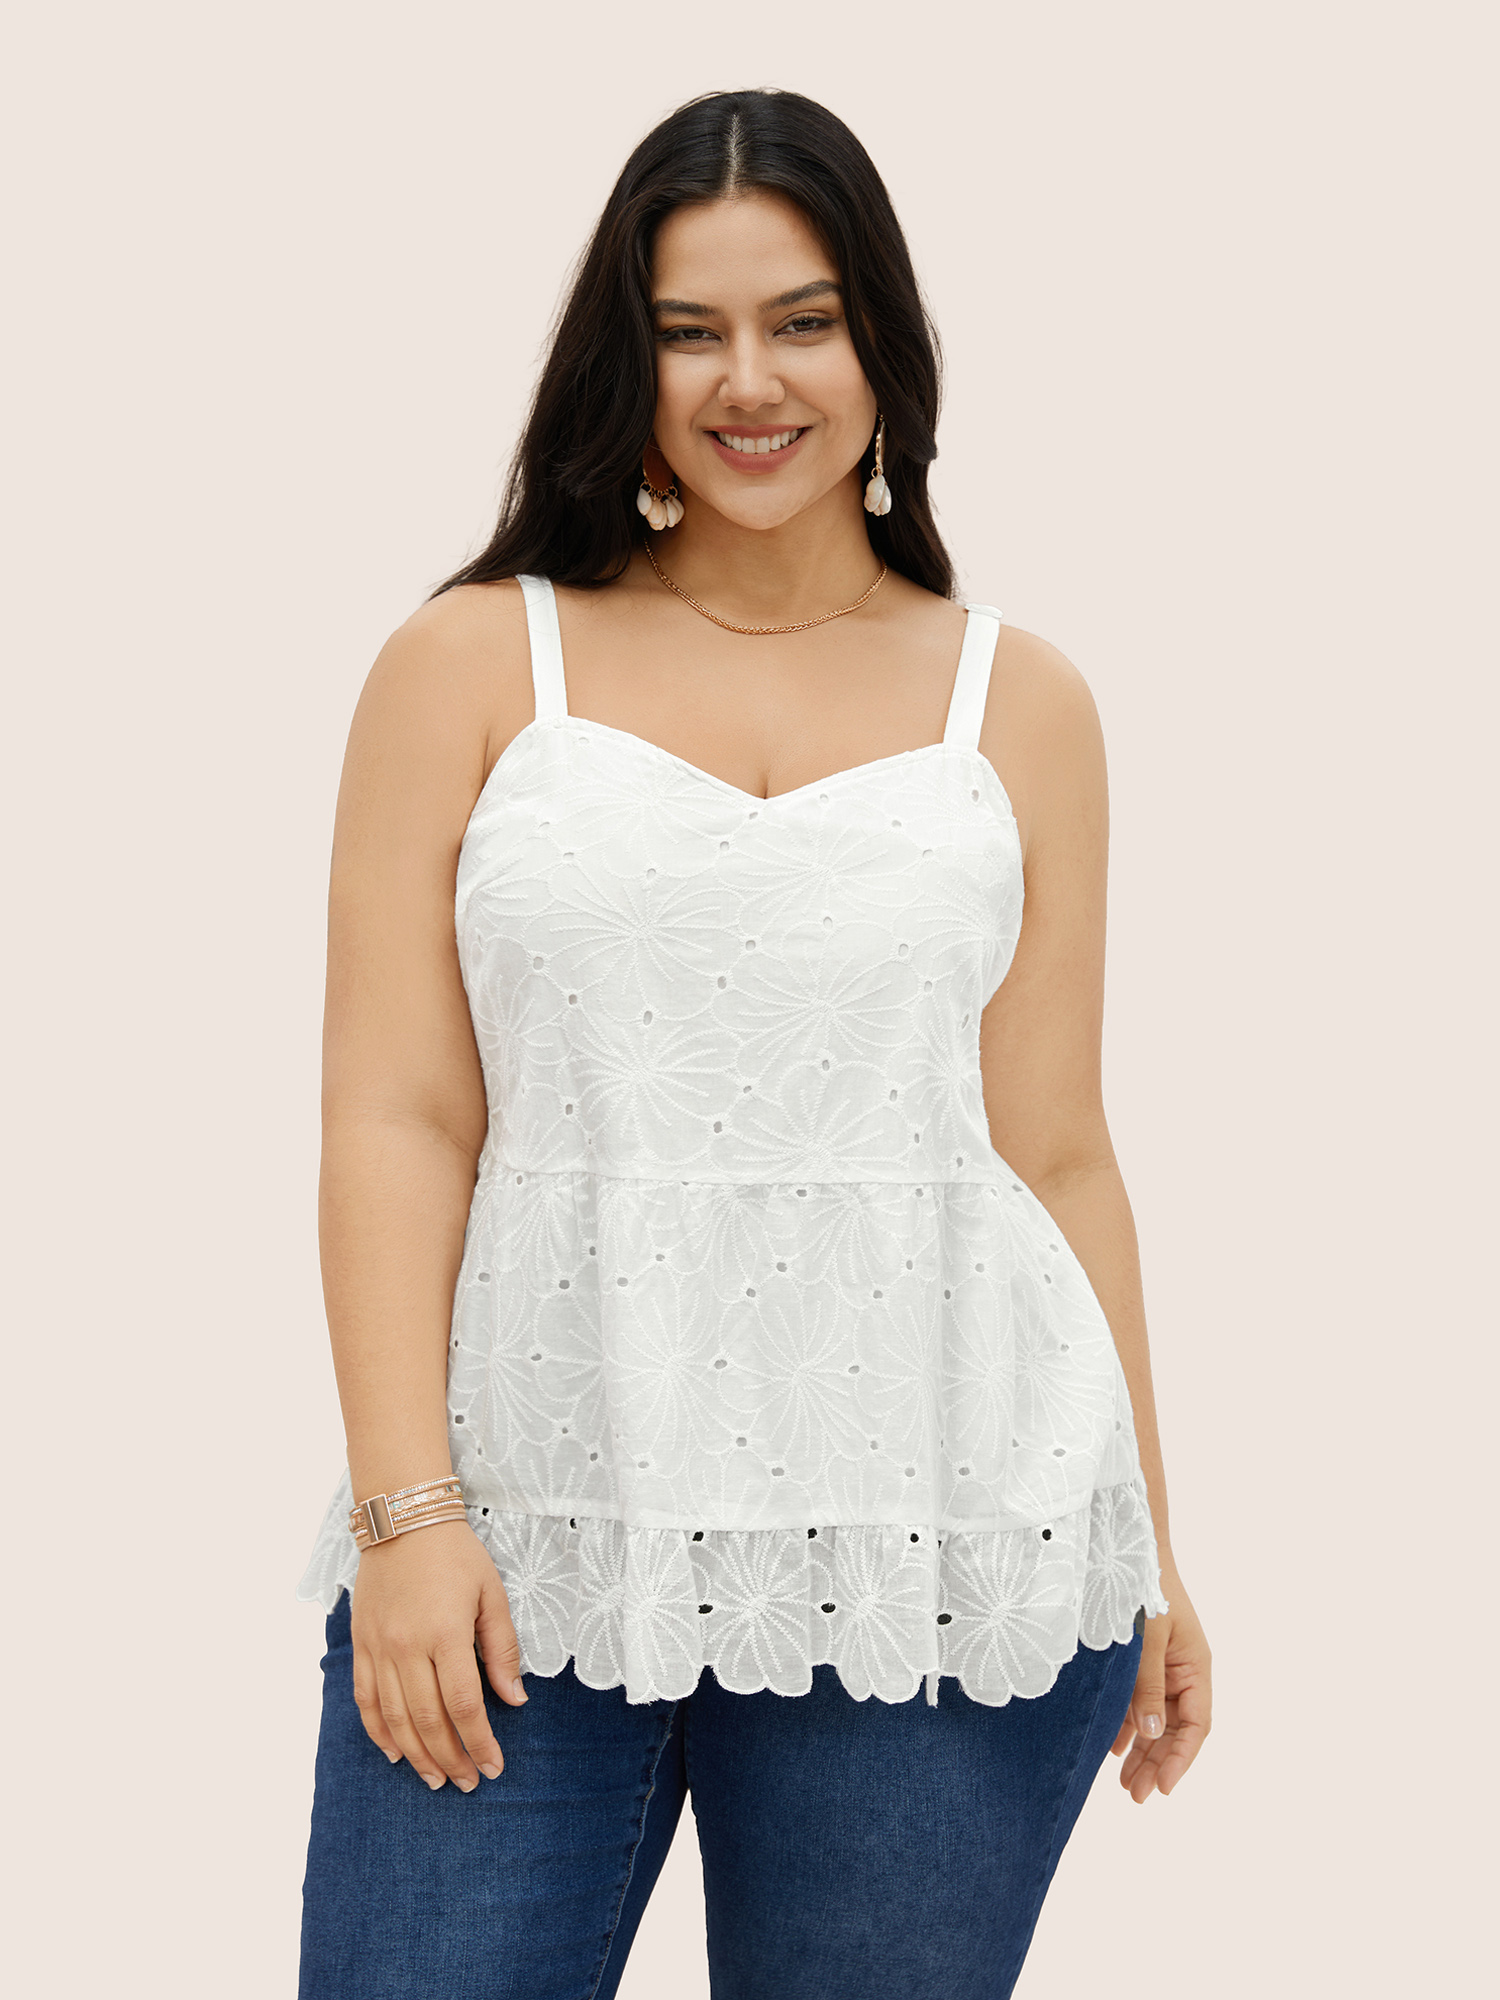 

Plus Size Solid Floral Cotton Blended Cami Top Women Ivory Resort Woven ribbon&lace trim Heart neckline Vacation Tank Tops Camis BloomChic